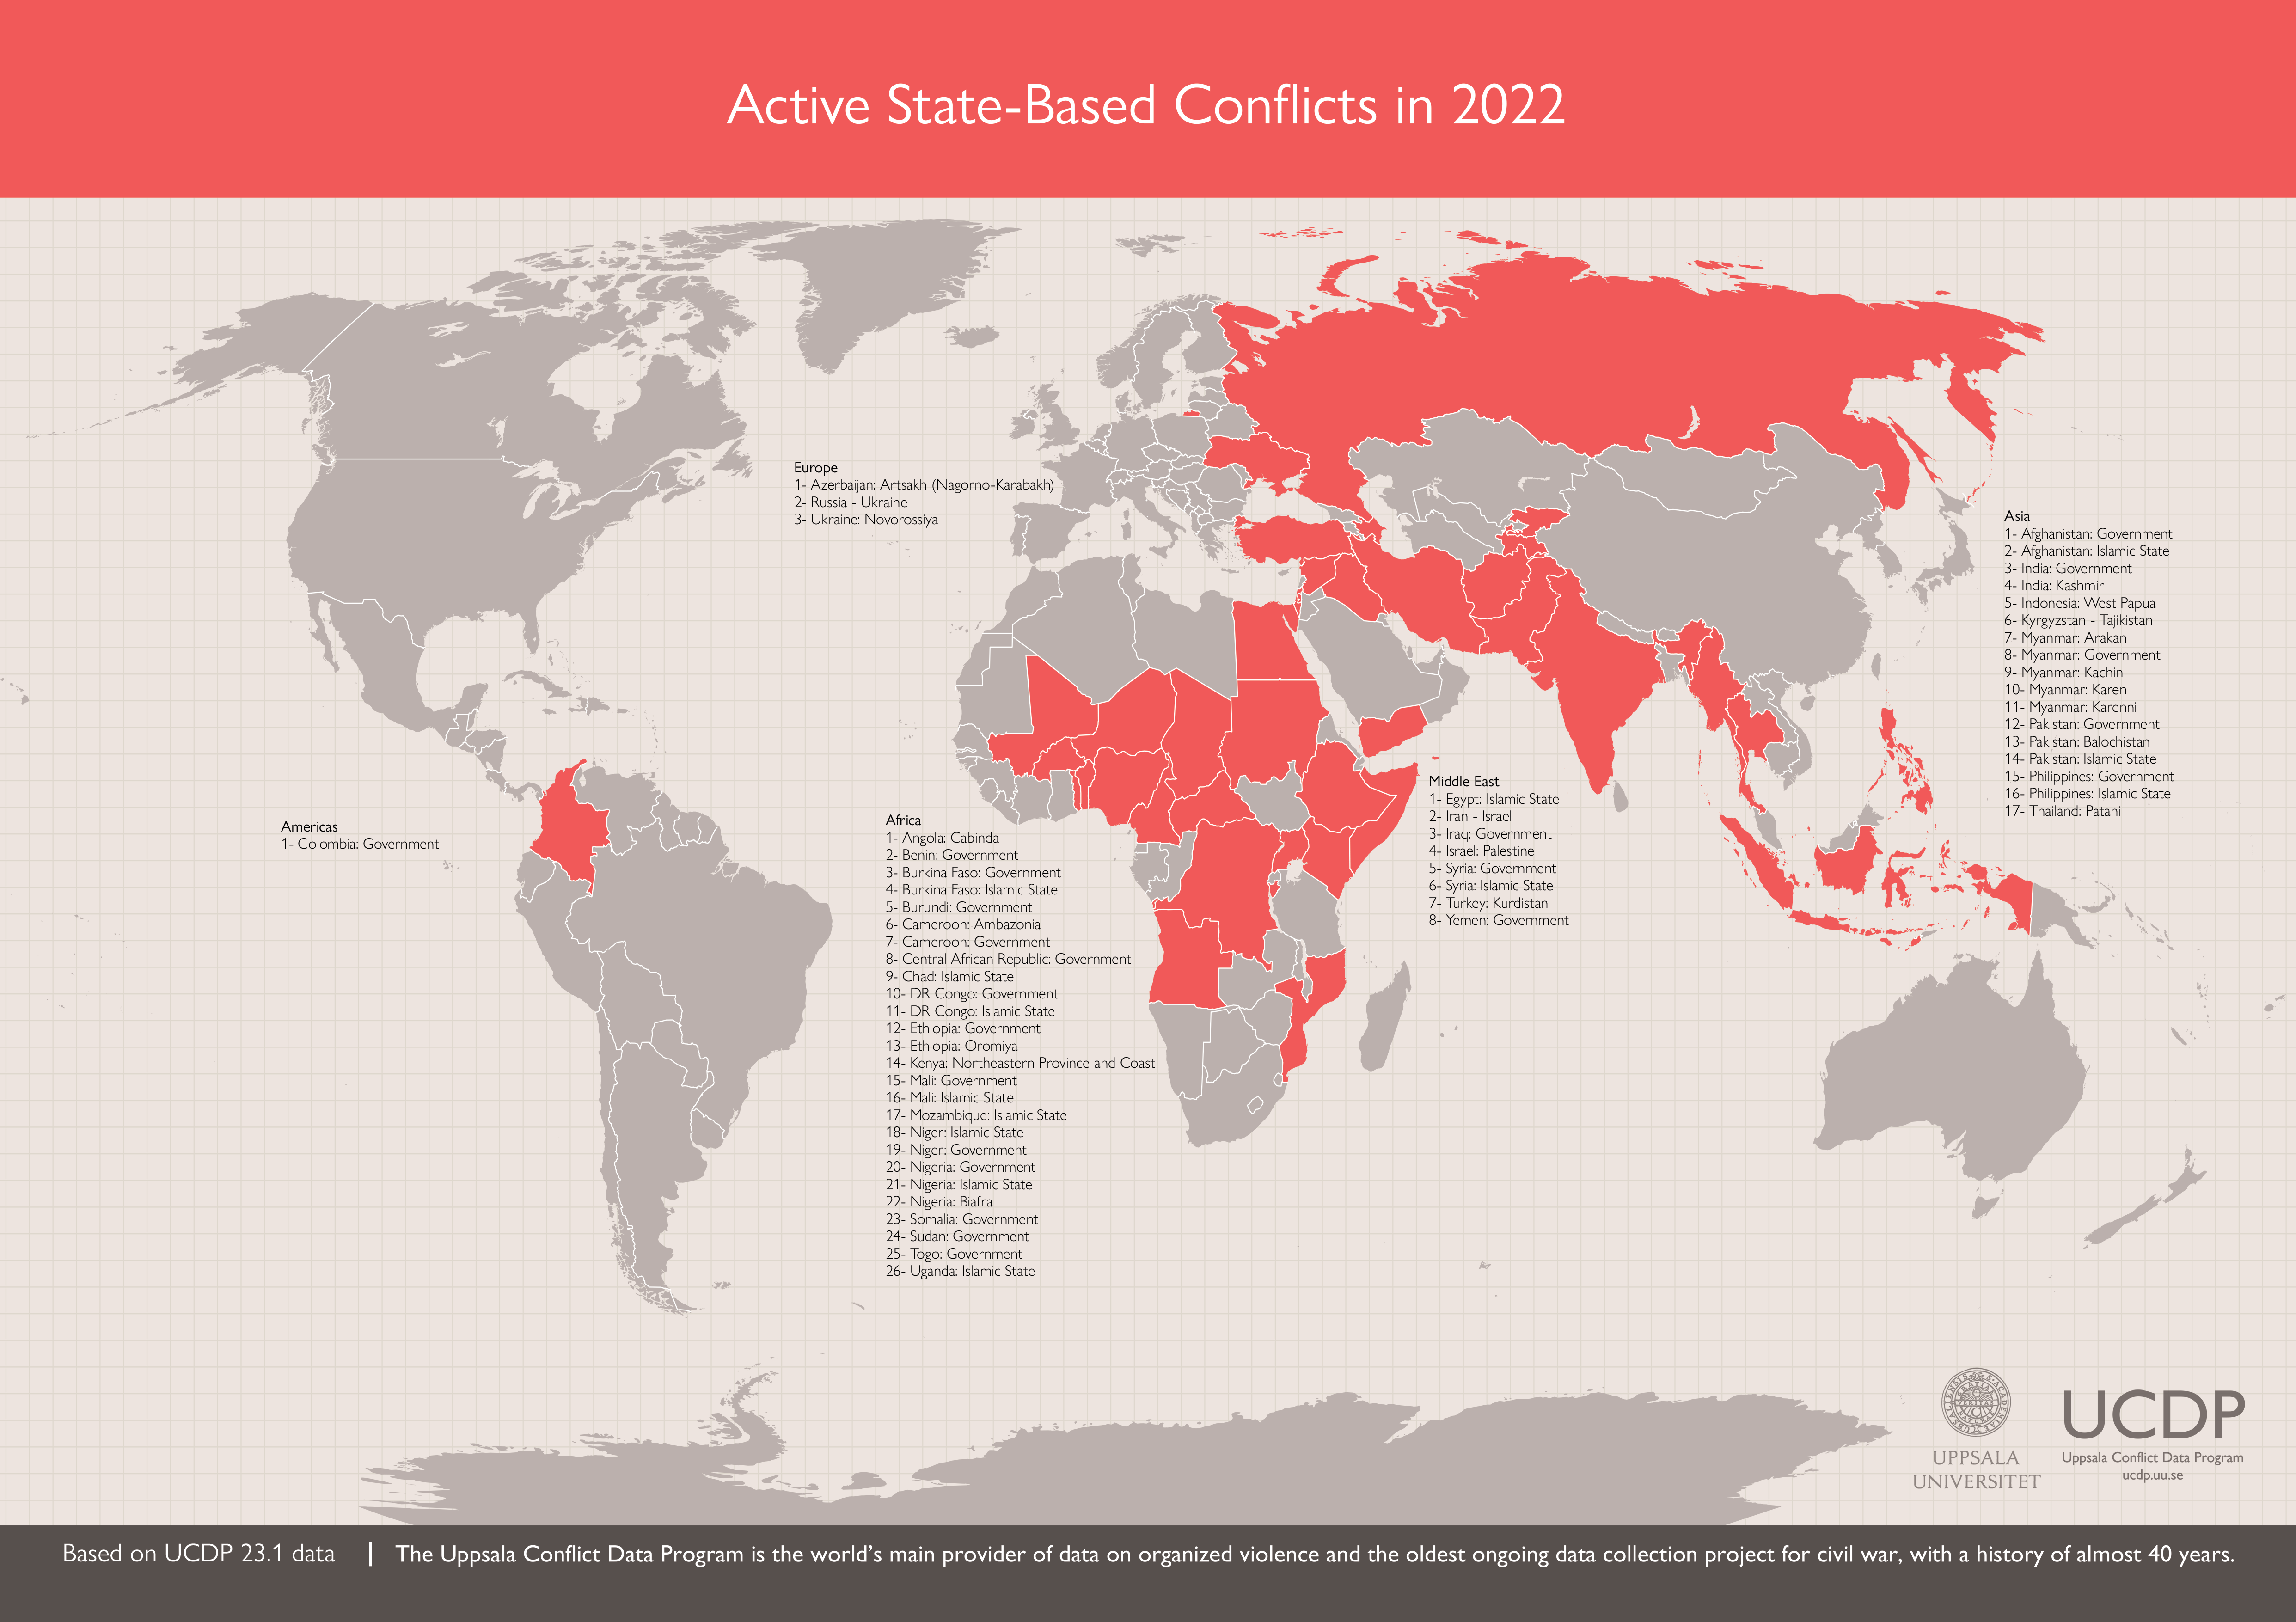 UCDP GED map: Active state-based conflicts in 2022